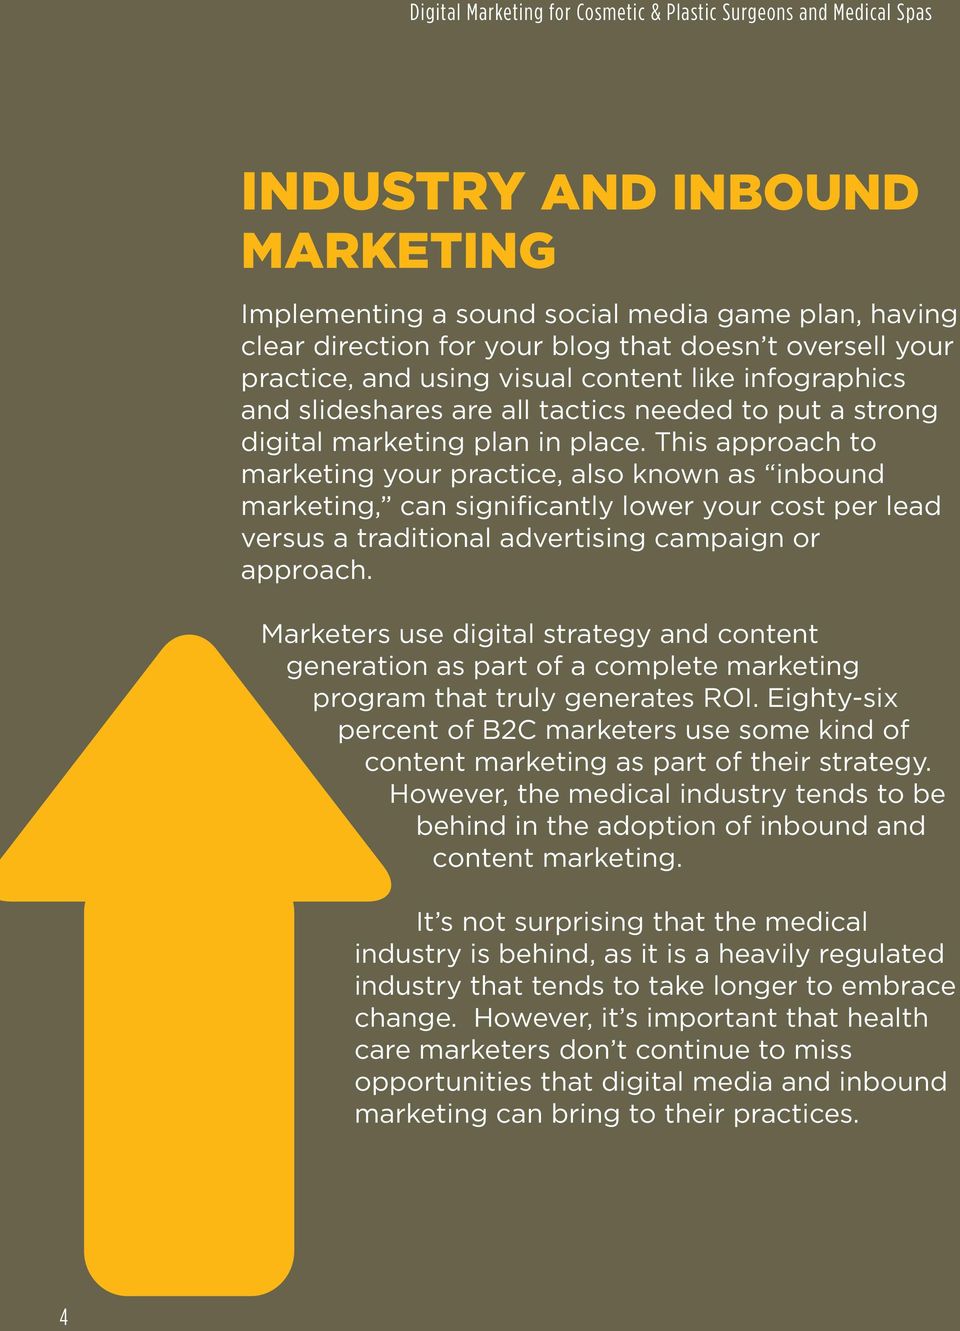 This approach to marketing your practice, also known as inbound marketing, can significantly lower your cost per lead versus a traditional advertising campaign or approach.